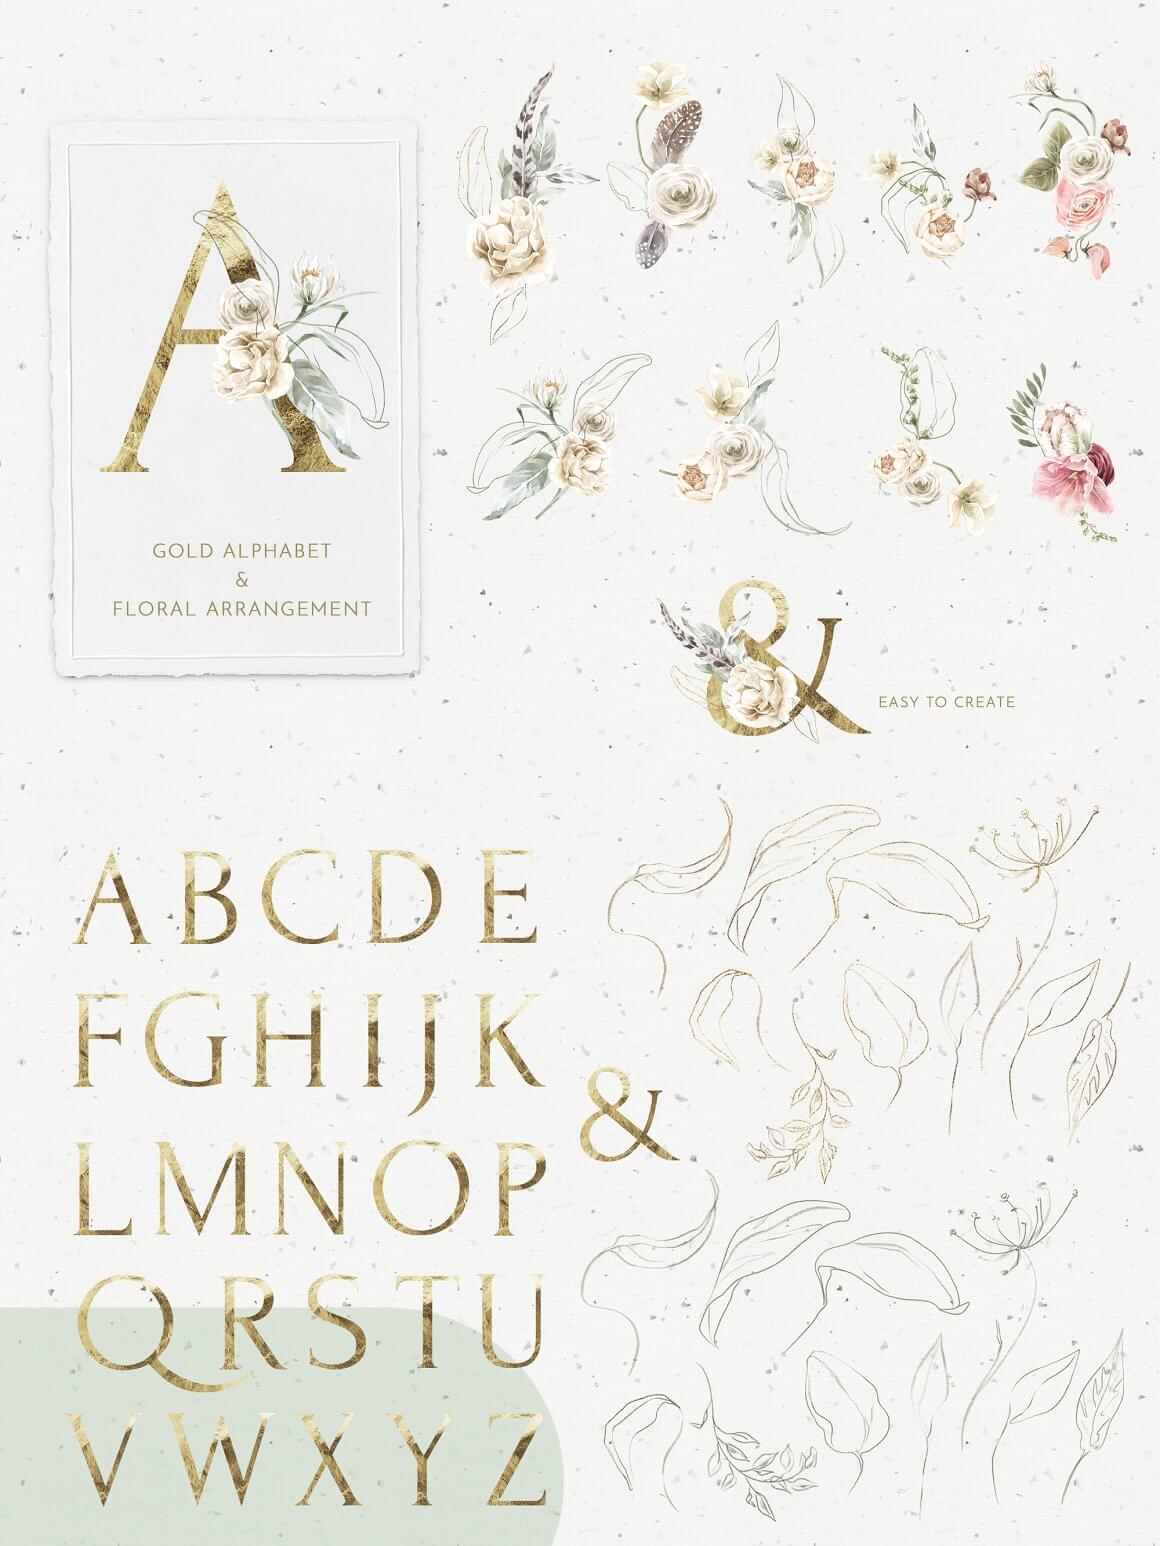 Easy to create gold alphabet with flowers.